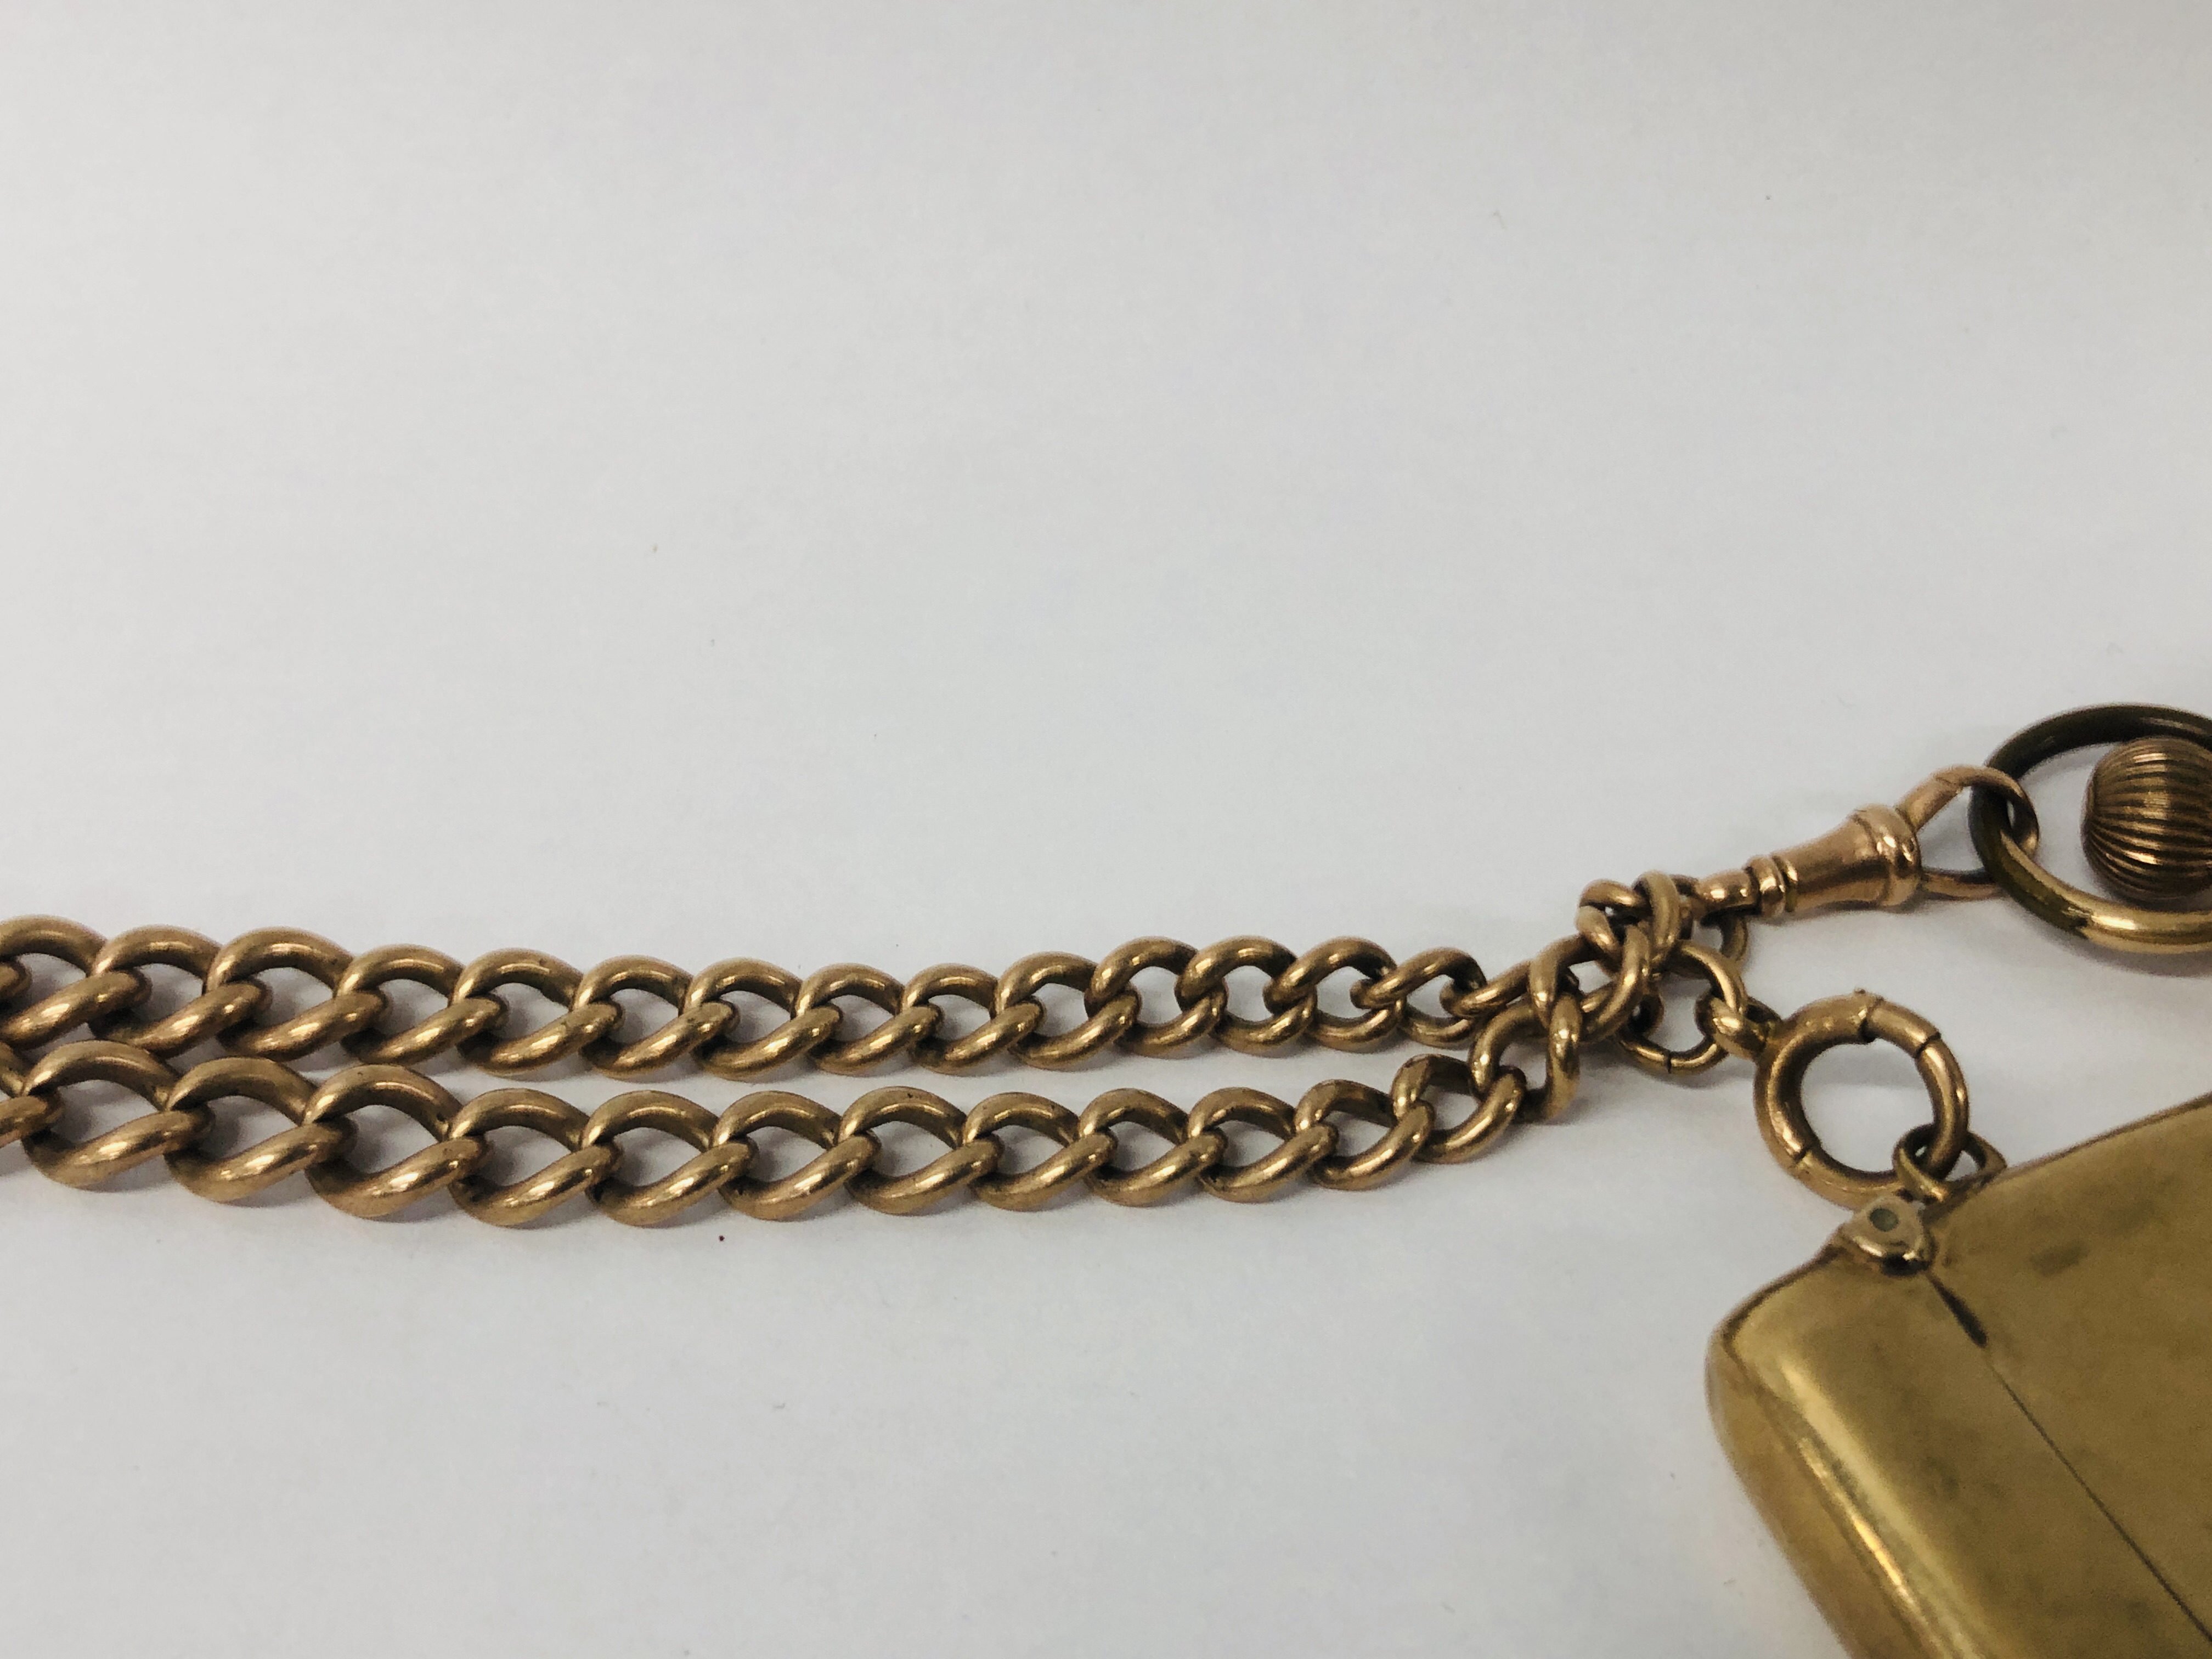 A WALTHAM GOLD PLATED POCKET WATCH ON 9CT GOLD WATCH CHAIN WITH A GEORGE V 1913 FULL SOVEREIGN COIN - Image 13 of 19